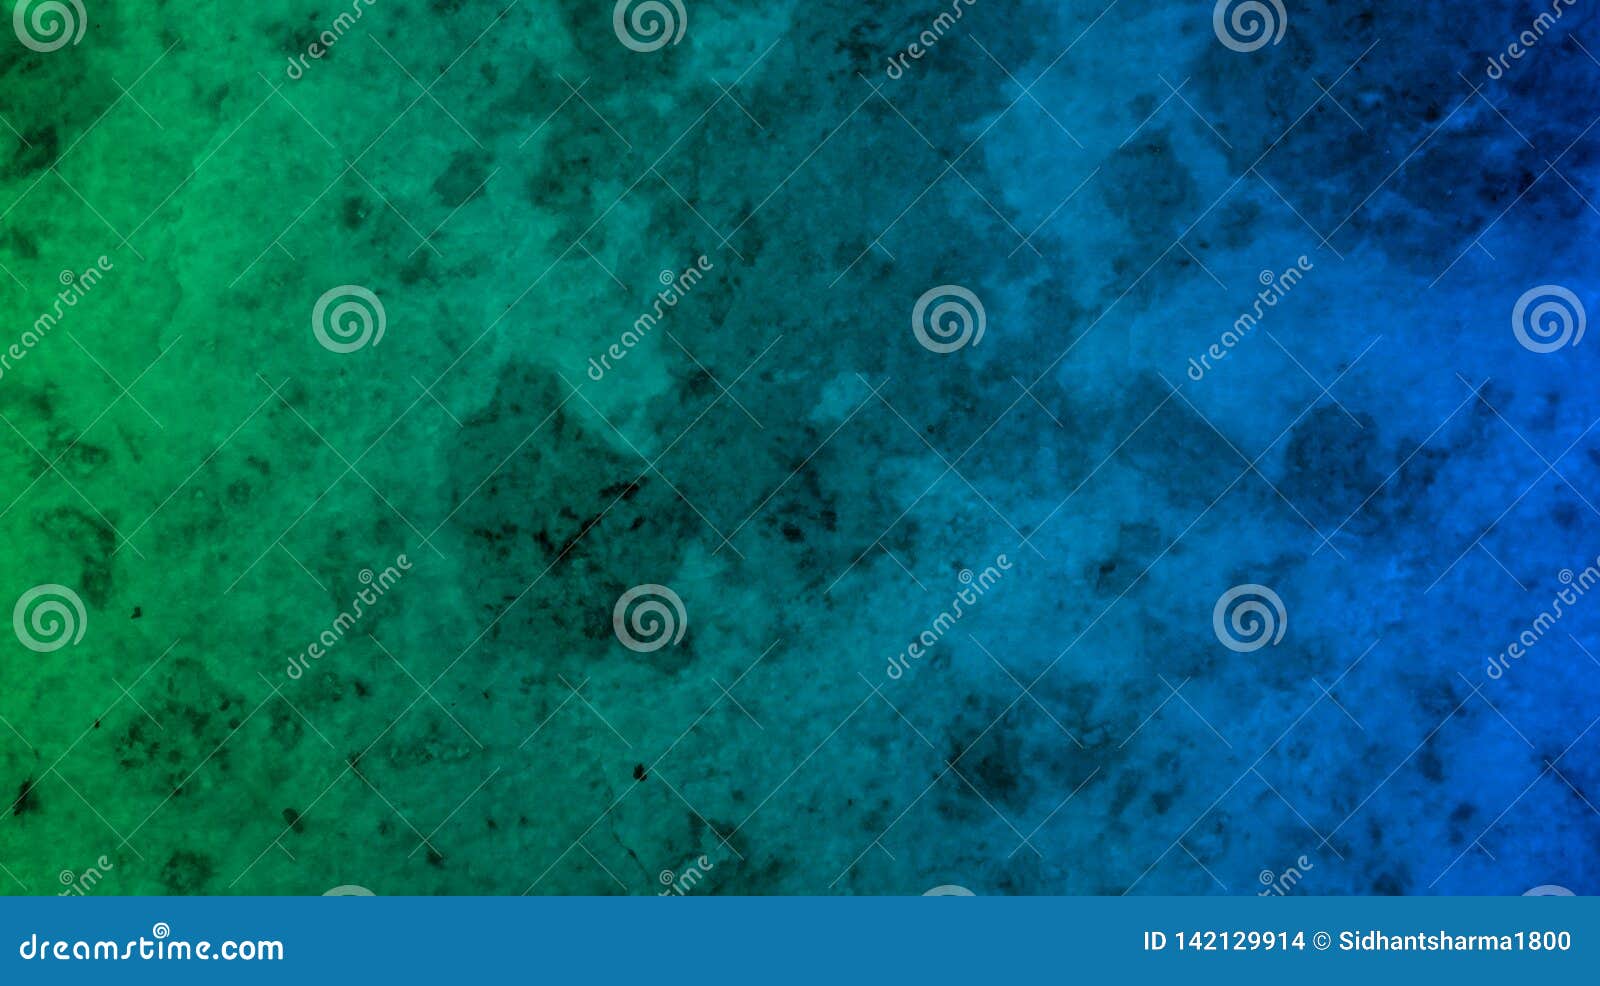 Abstract Green Blue Color Mixture Marble Texture Background Wallpaper Stock Illustration